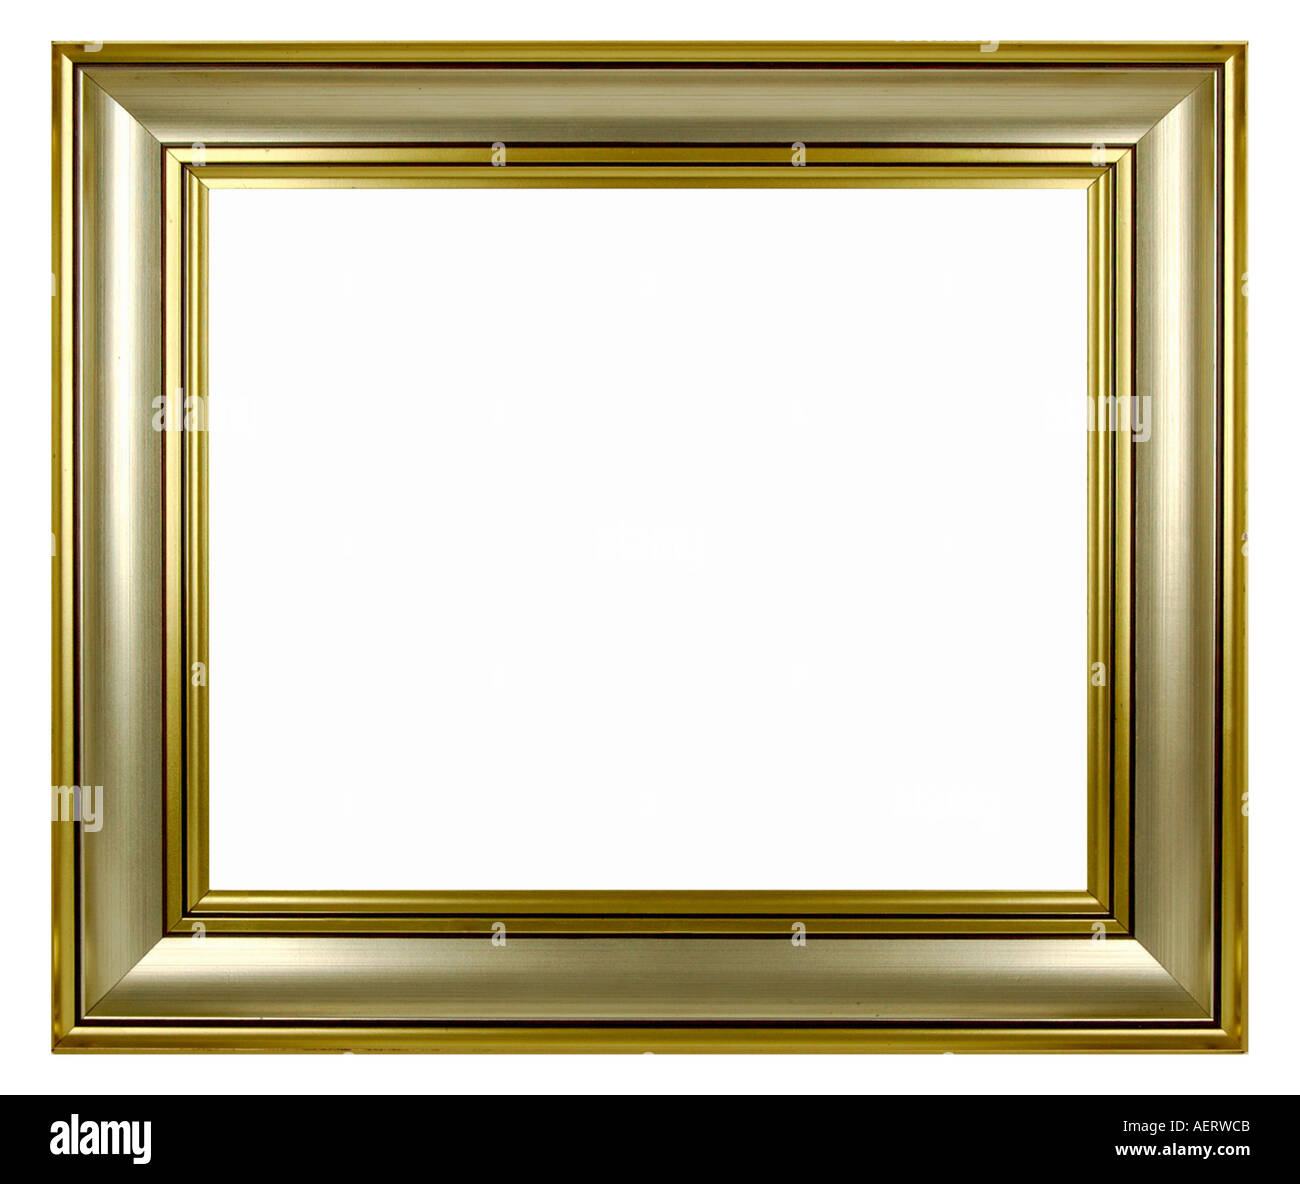 Golden plated picture frame Stock Photo